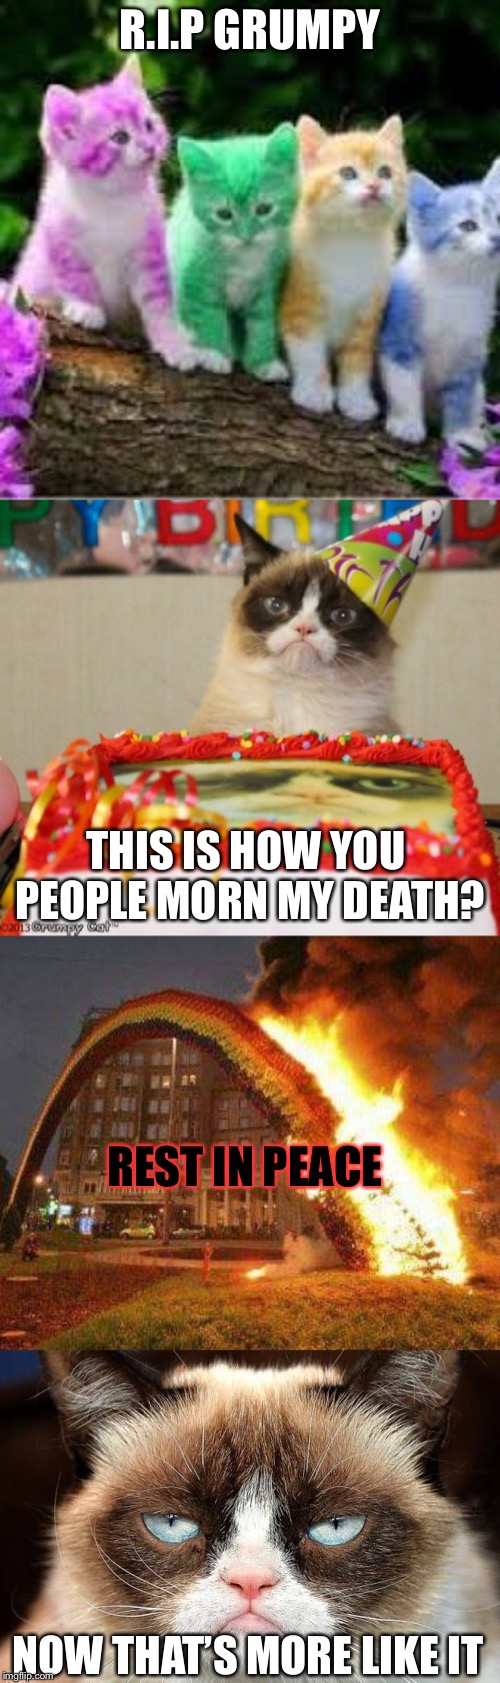 We all will miss you!!! | R.I.P GRUMPY; THIS IS HOW YOU PEOPLE MORN MY DEATH? REST IN PEACE; NOW THAT’S MORE LIKE IT | image tagged in memes,grumpy cat birthday,grumpy cat not amused,burning rainbow,rainbow cats | made w/ Imgflip meme maker